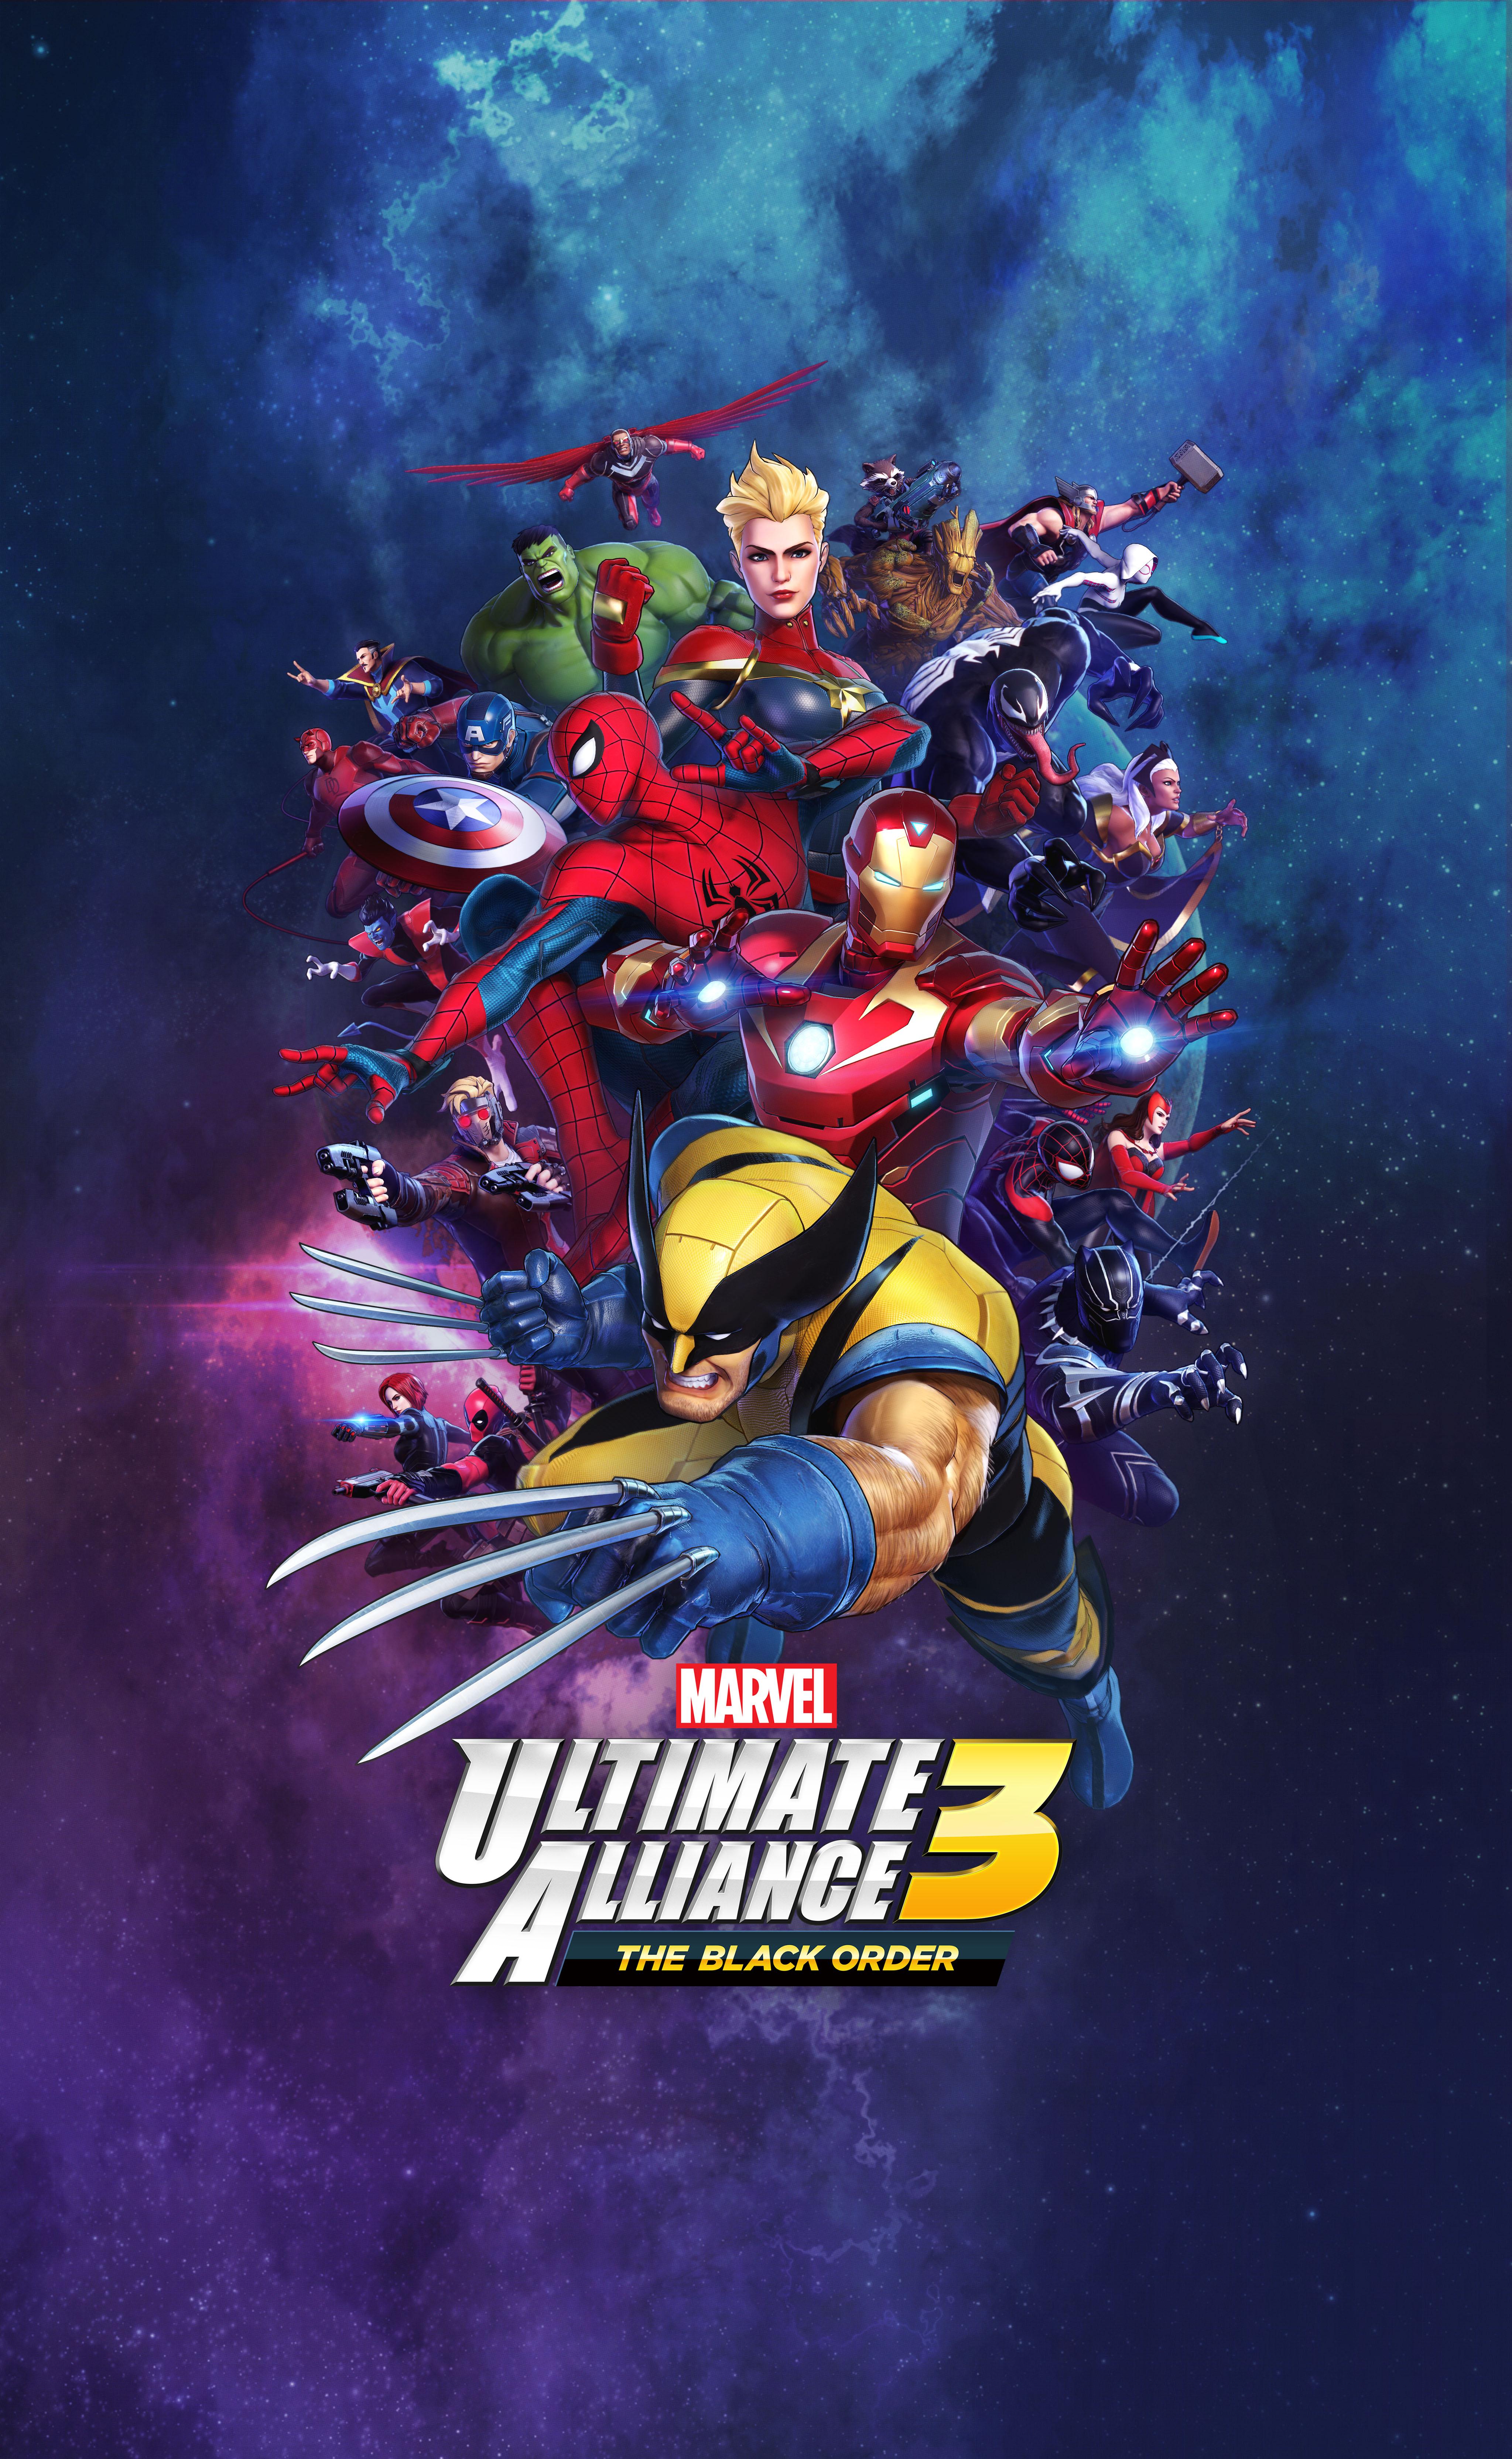 Marvel Ultimate Alliance 3: The Black Order comes to Switch on July